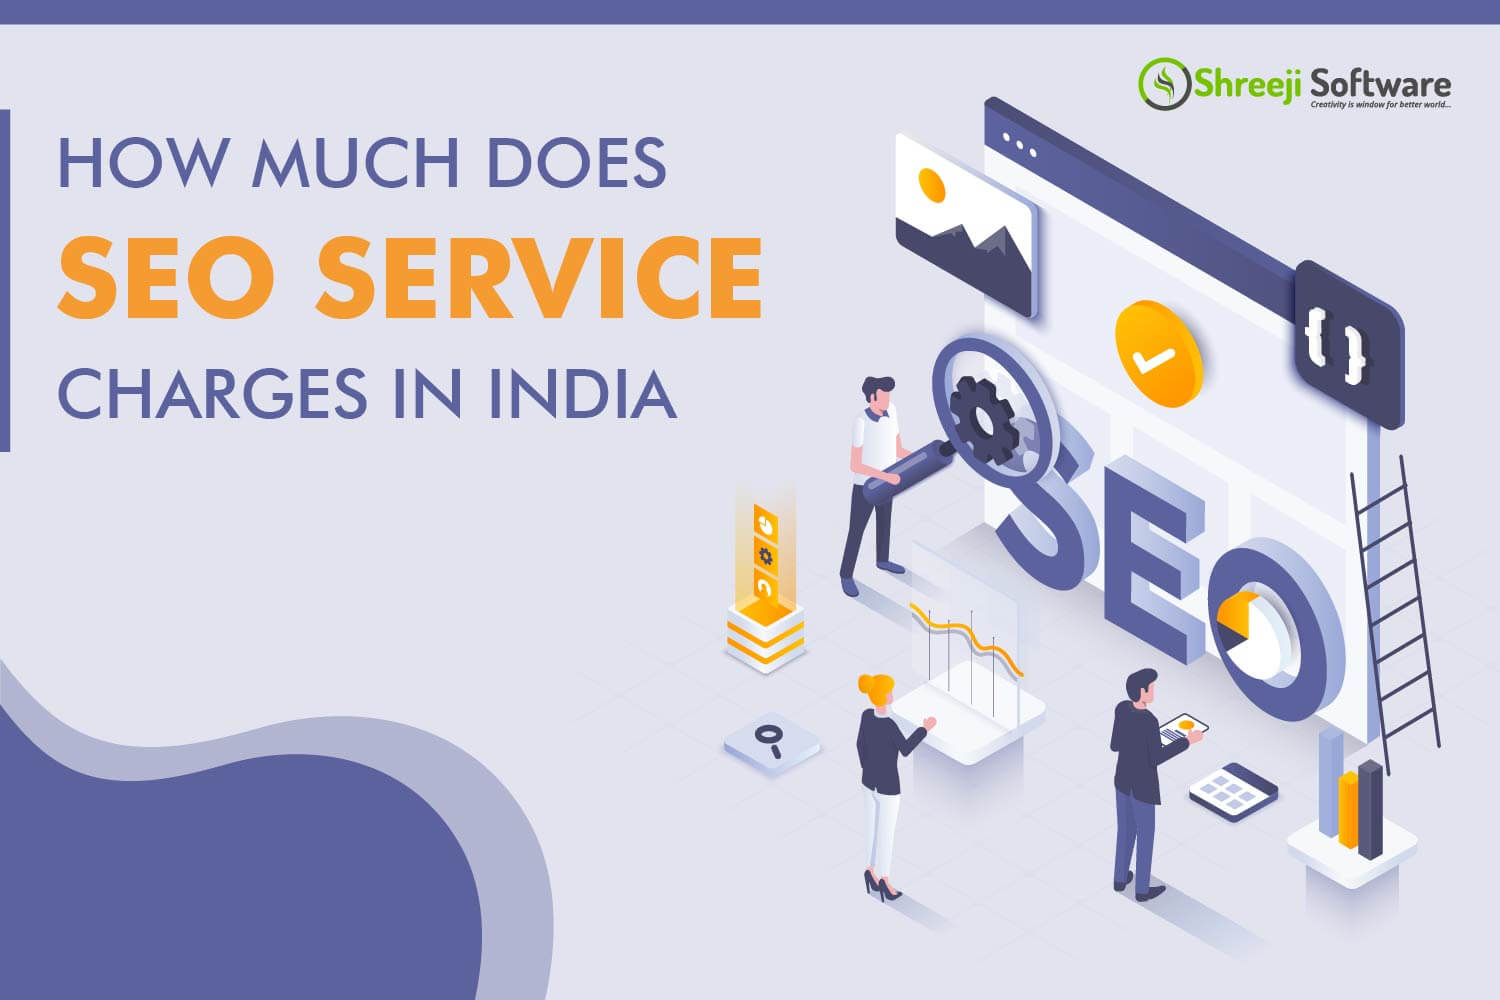 SEO charges in India